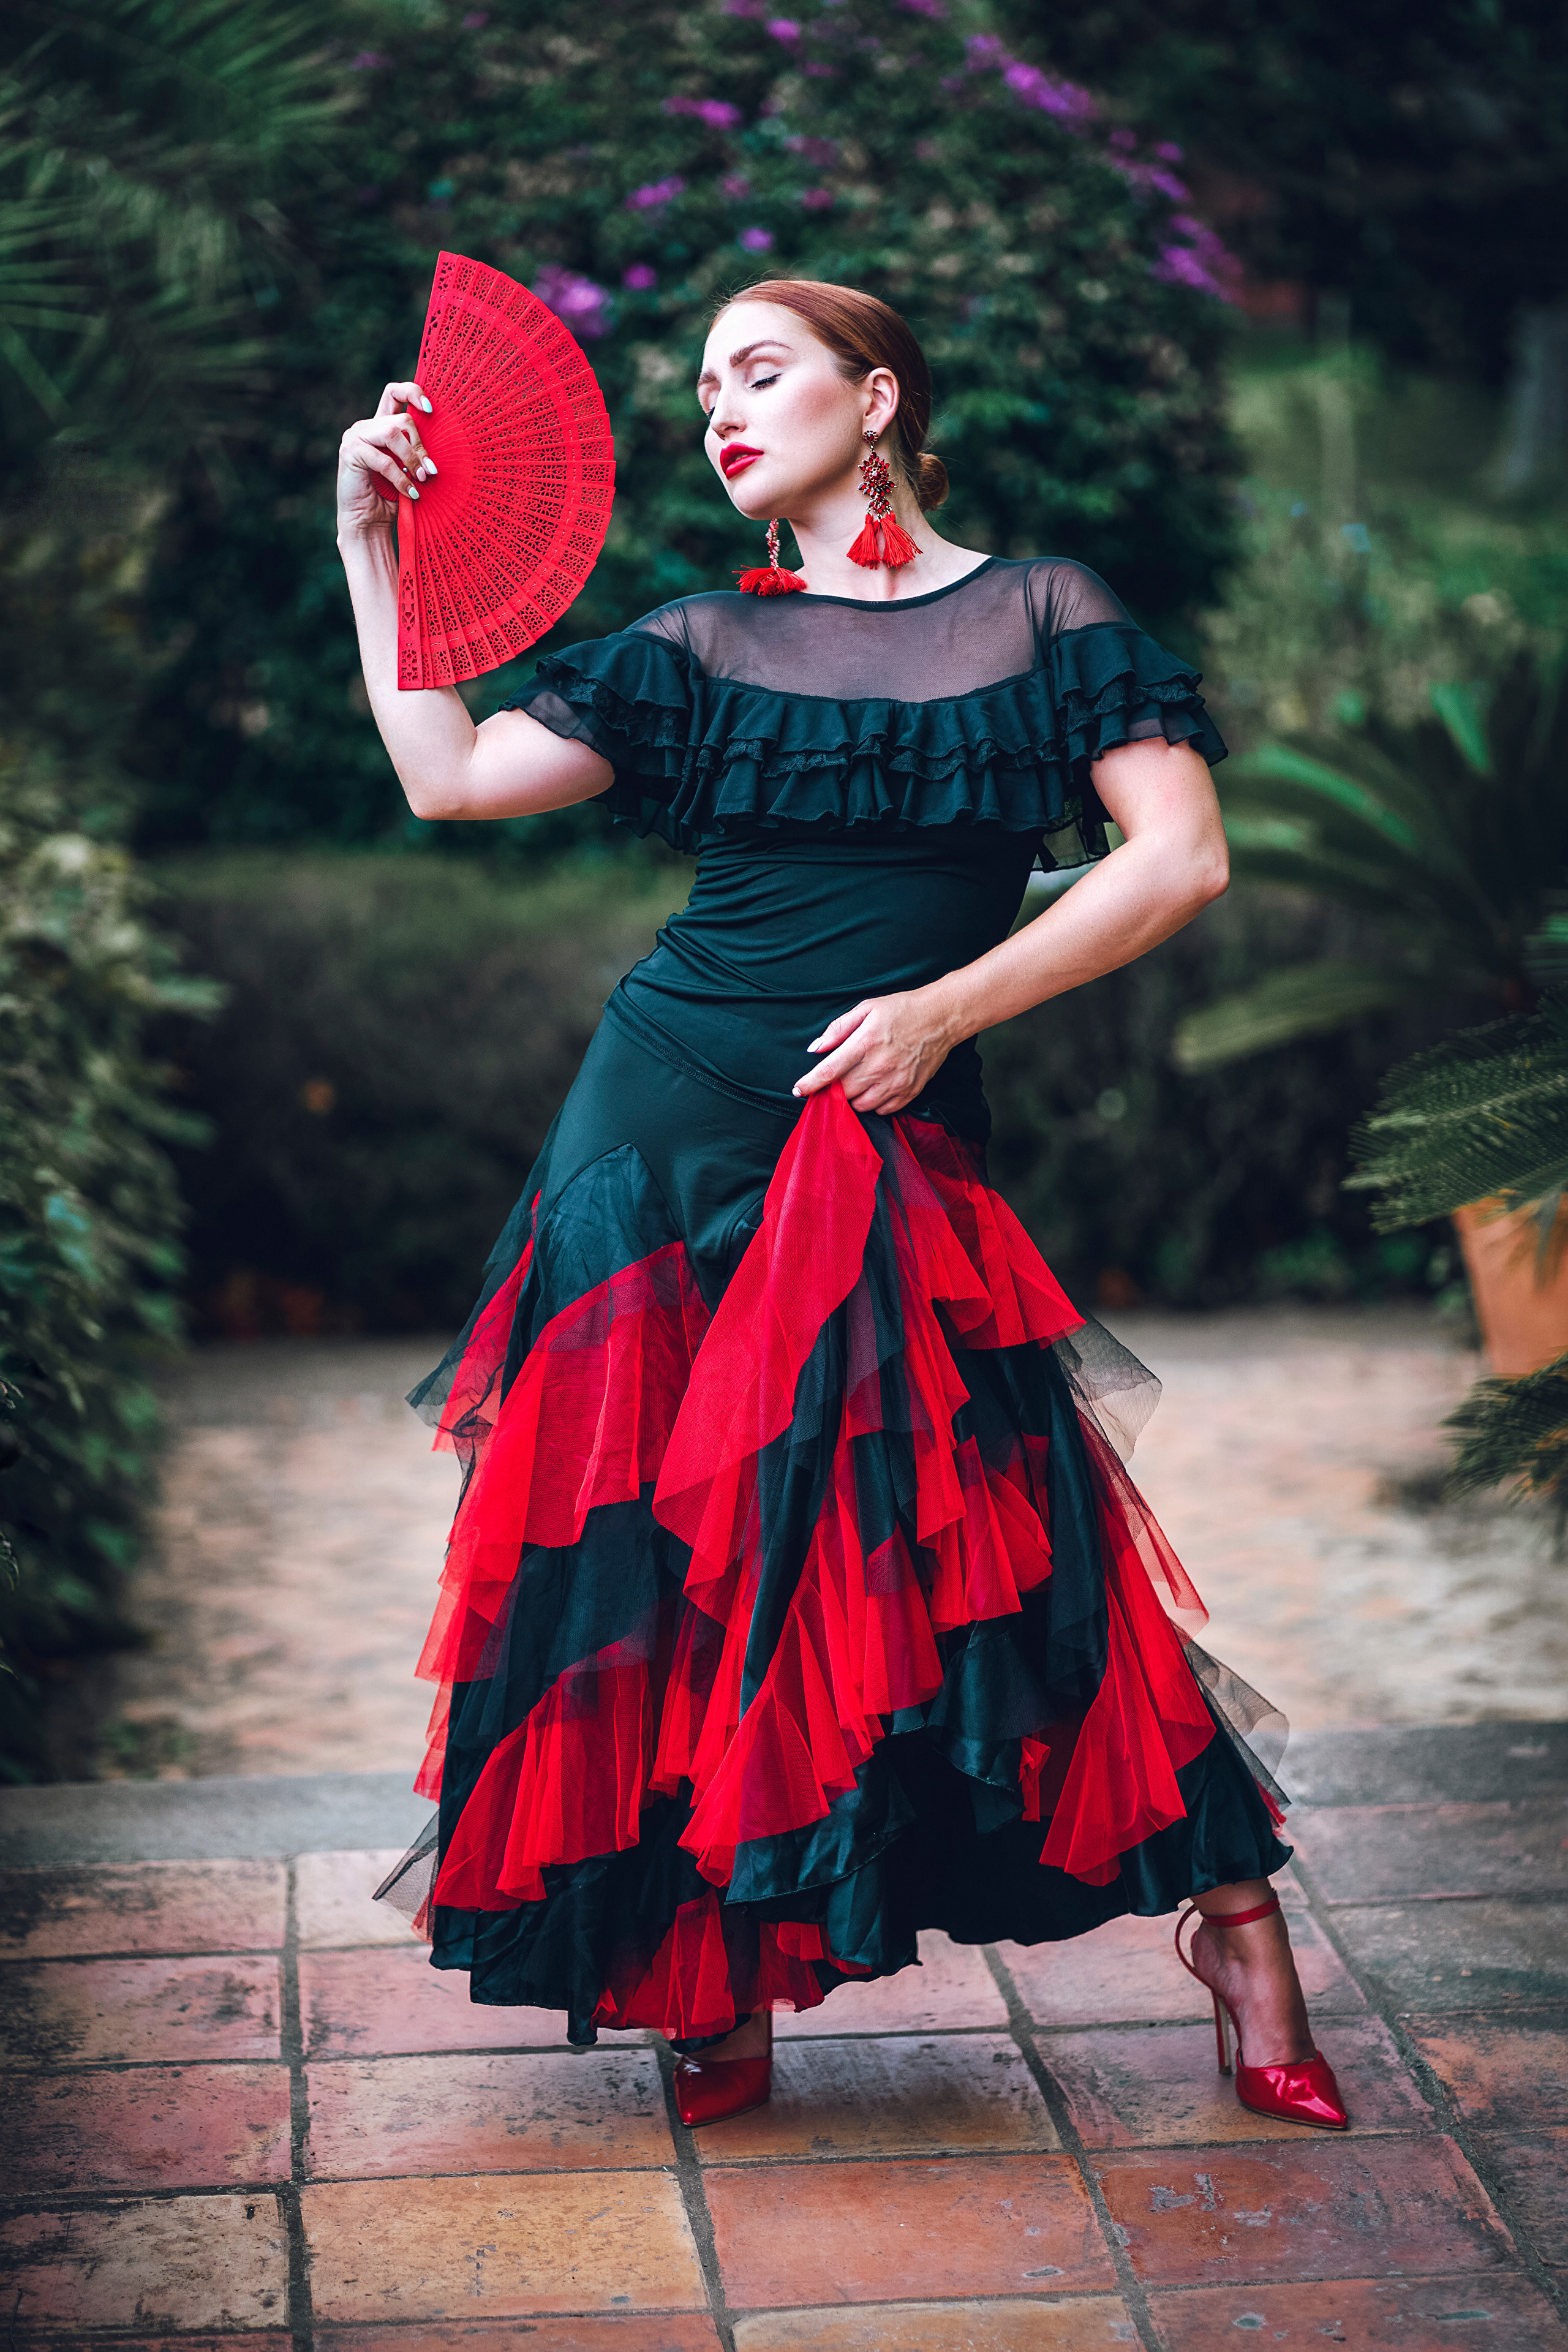 Woman In Spanish Costume Standing In Flamenco Dance Pose Stock Photo,  Picture and Royalty Free Image. Image 7302197.